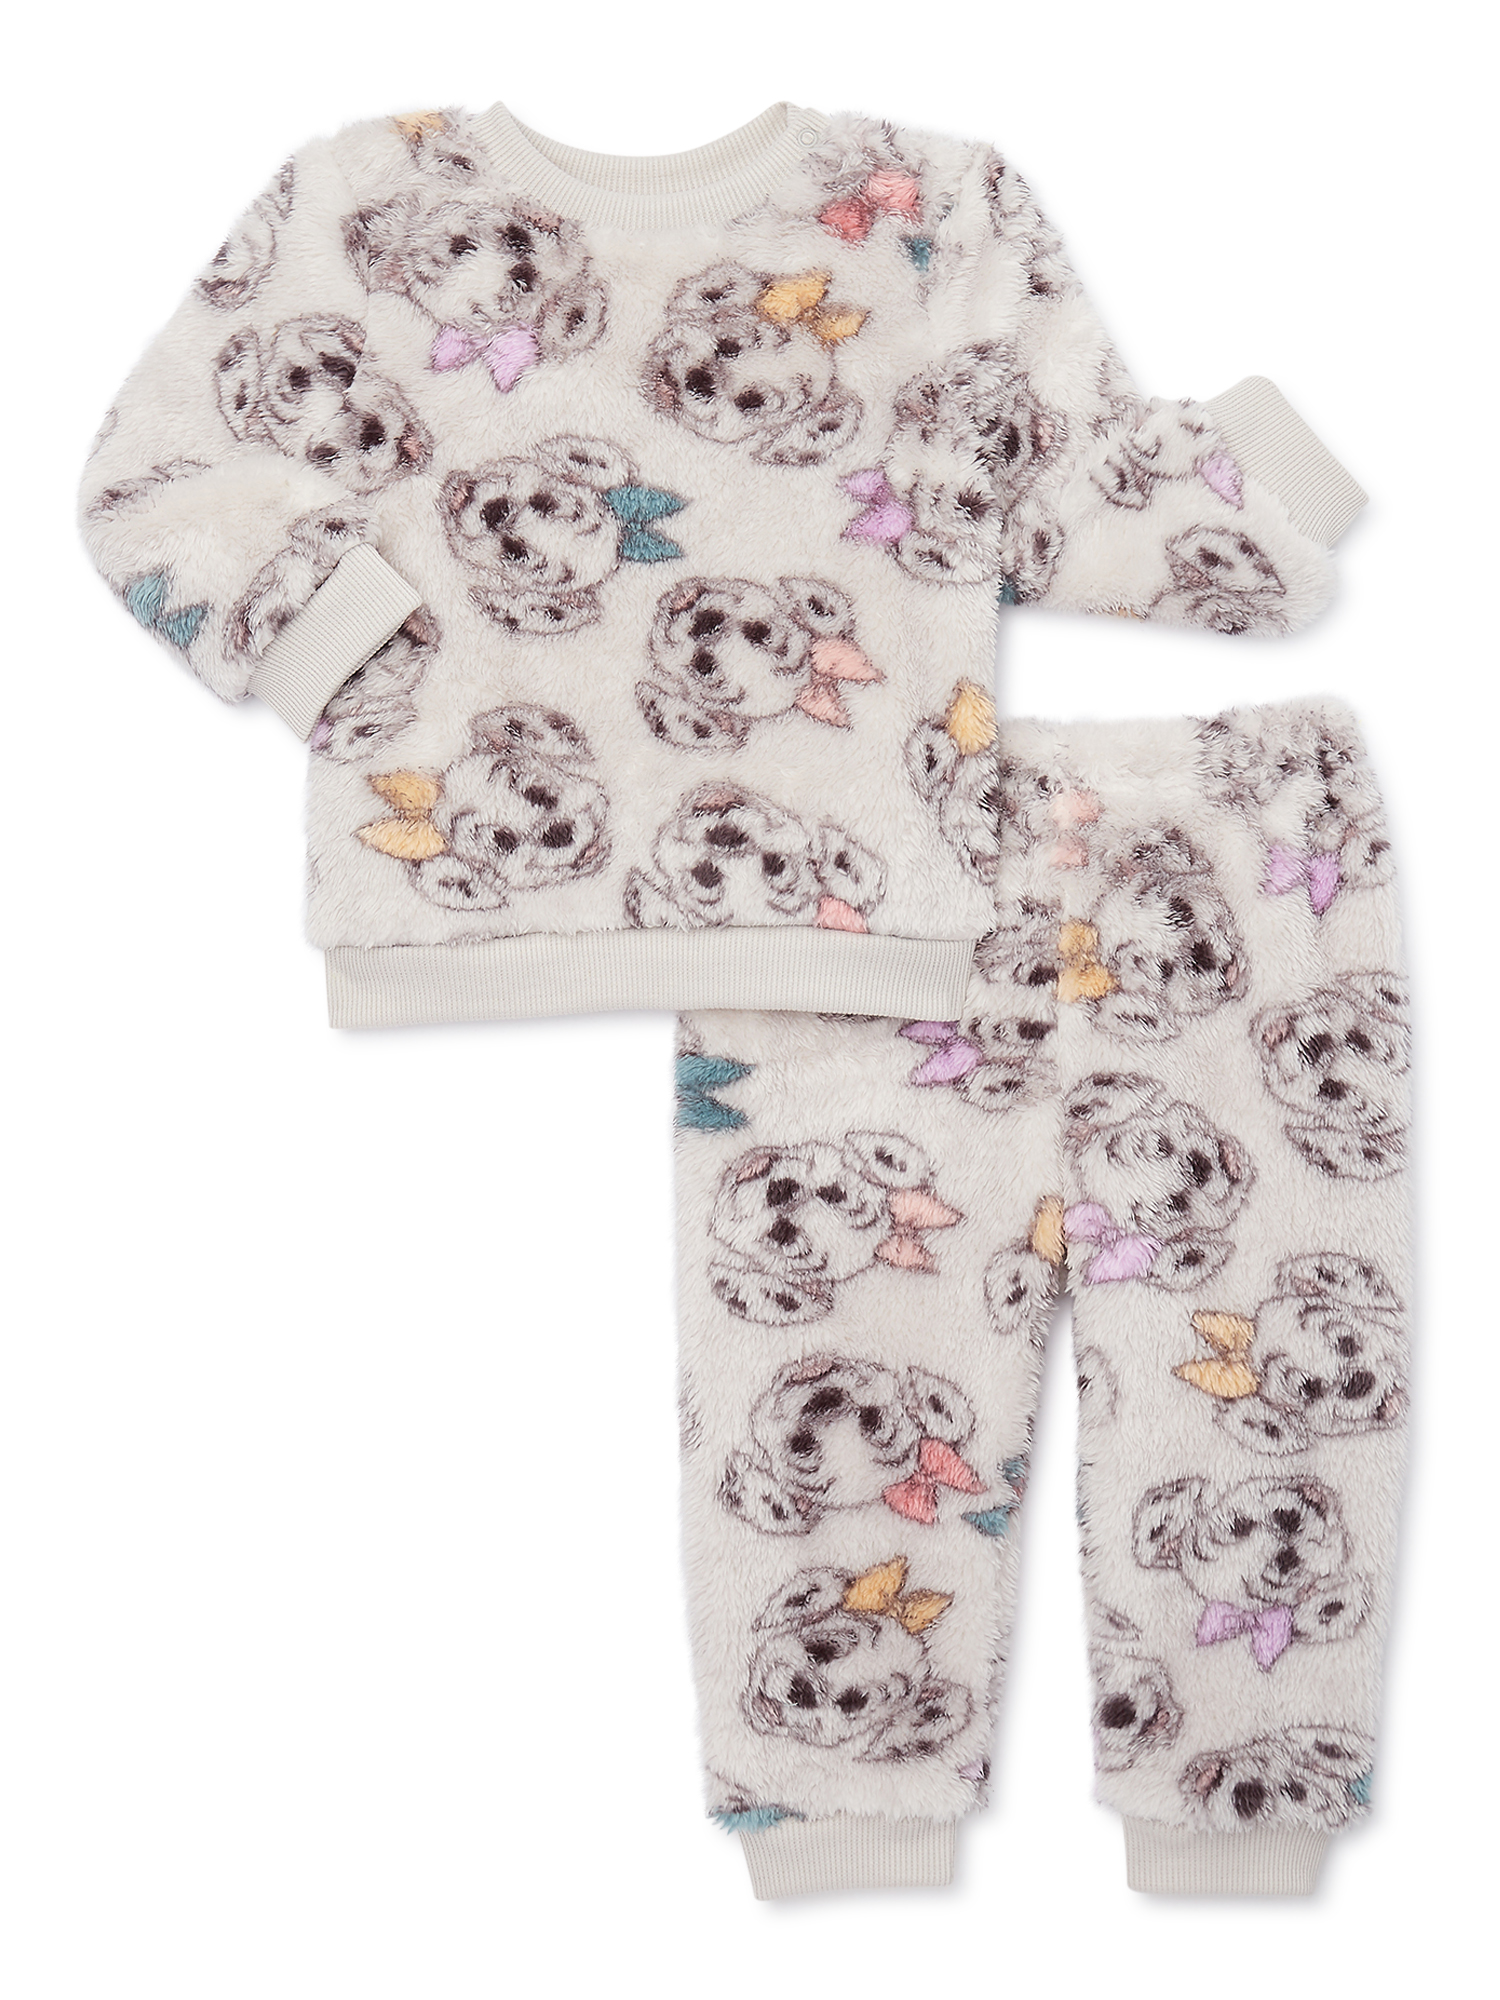 Disney 101 Dalmatians Baby Boys Long Sleeve Top and Pants Faux Sherpa Set, 2-Piece, Sizes 0/3-24 Months - image 1 of 7